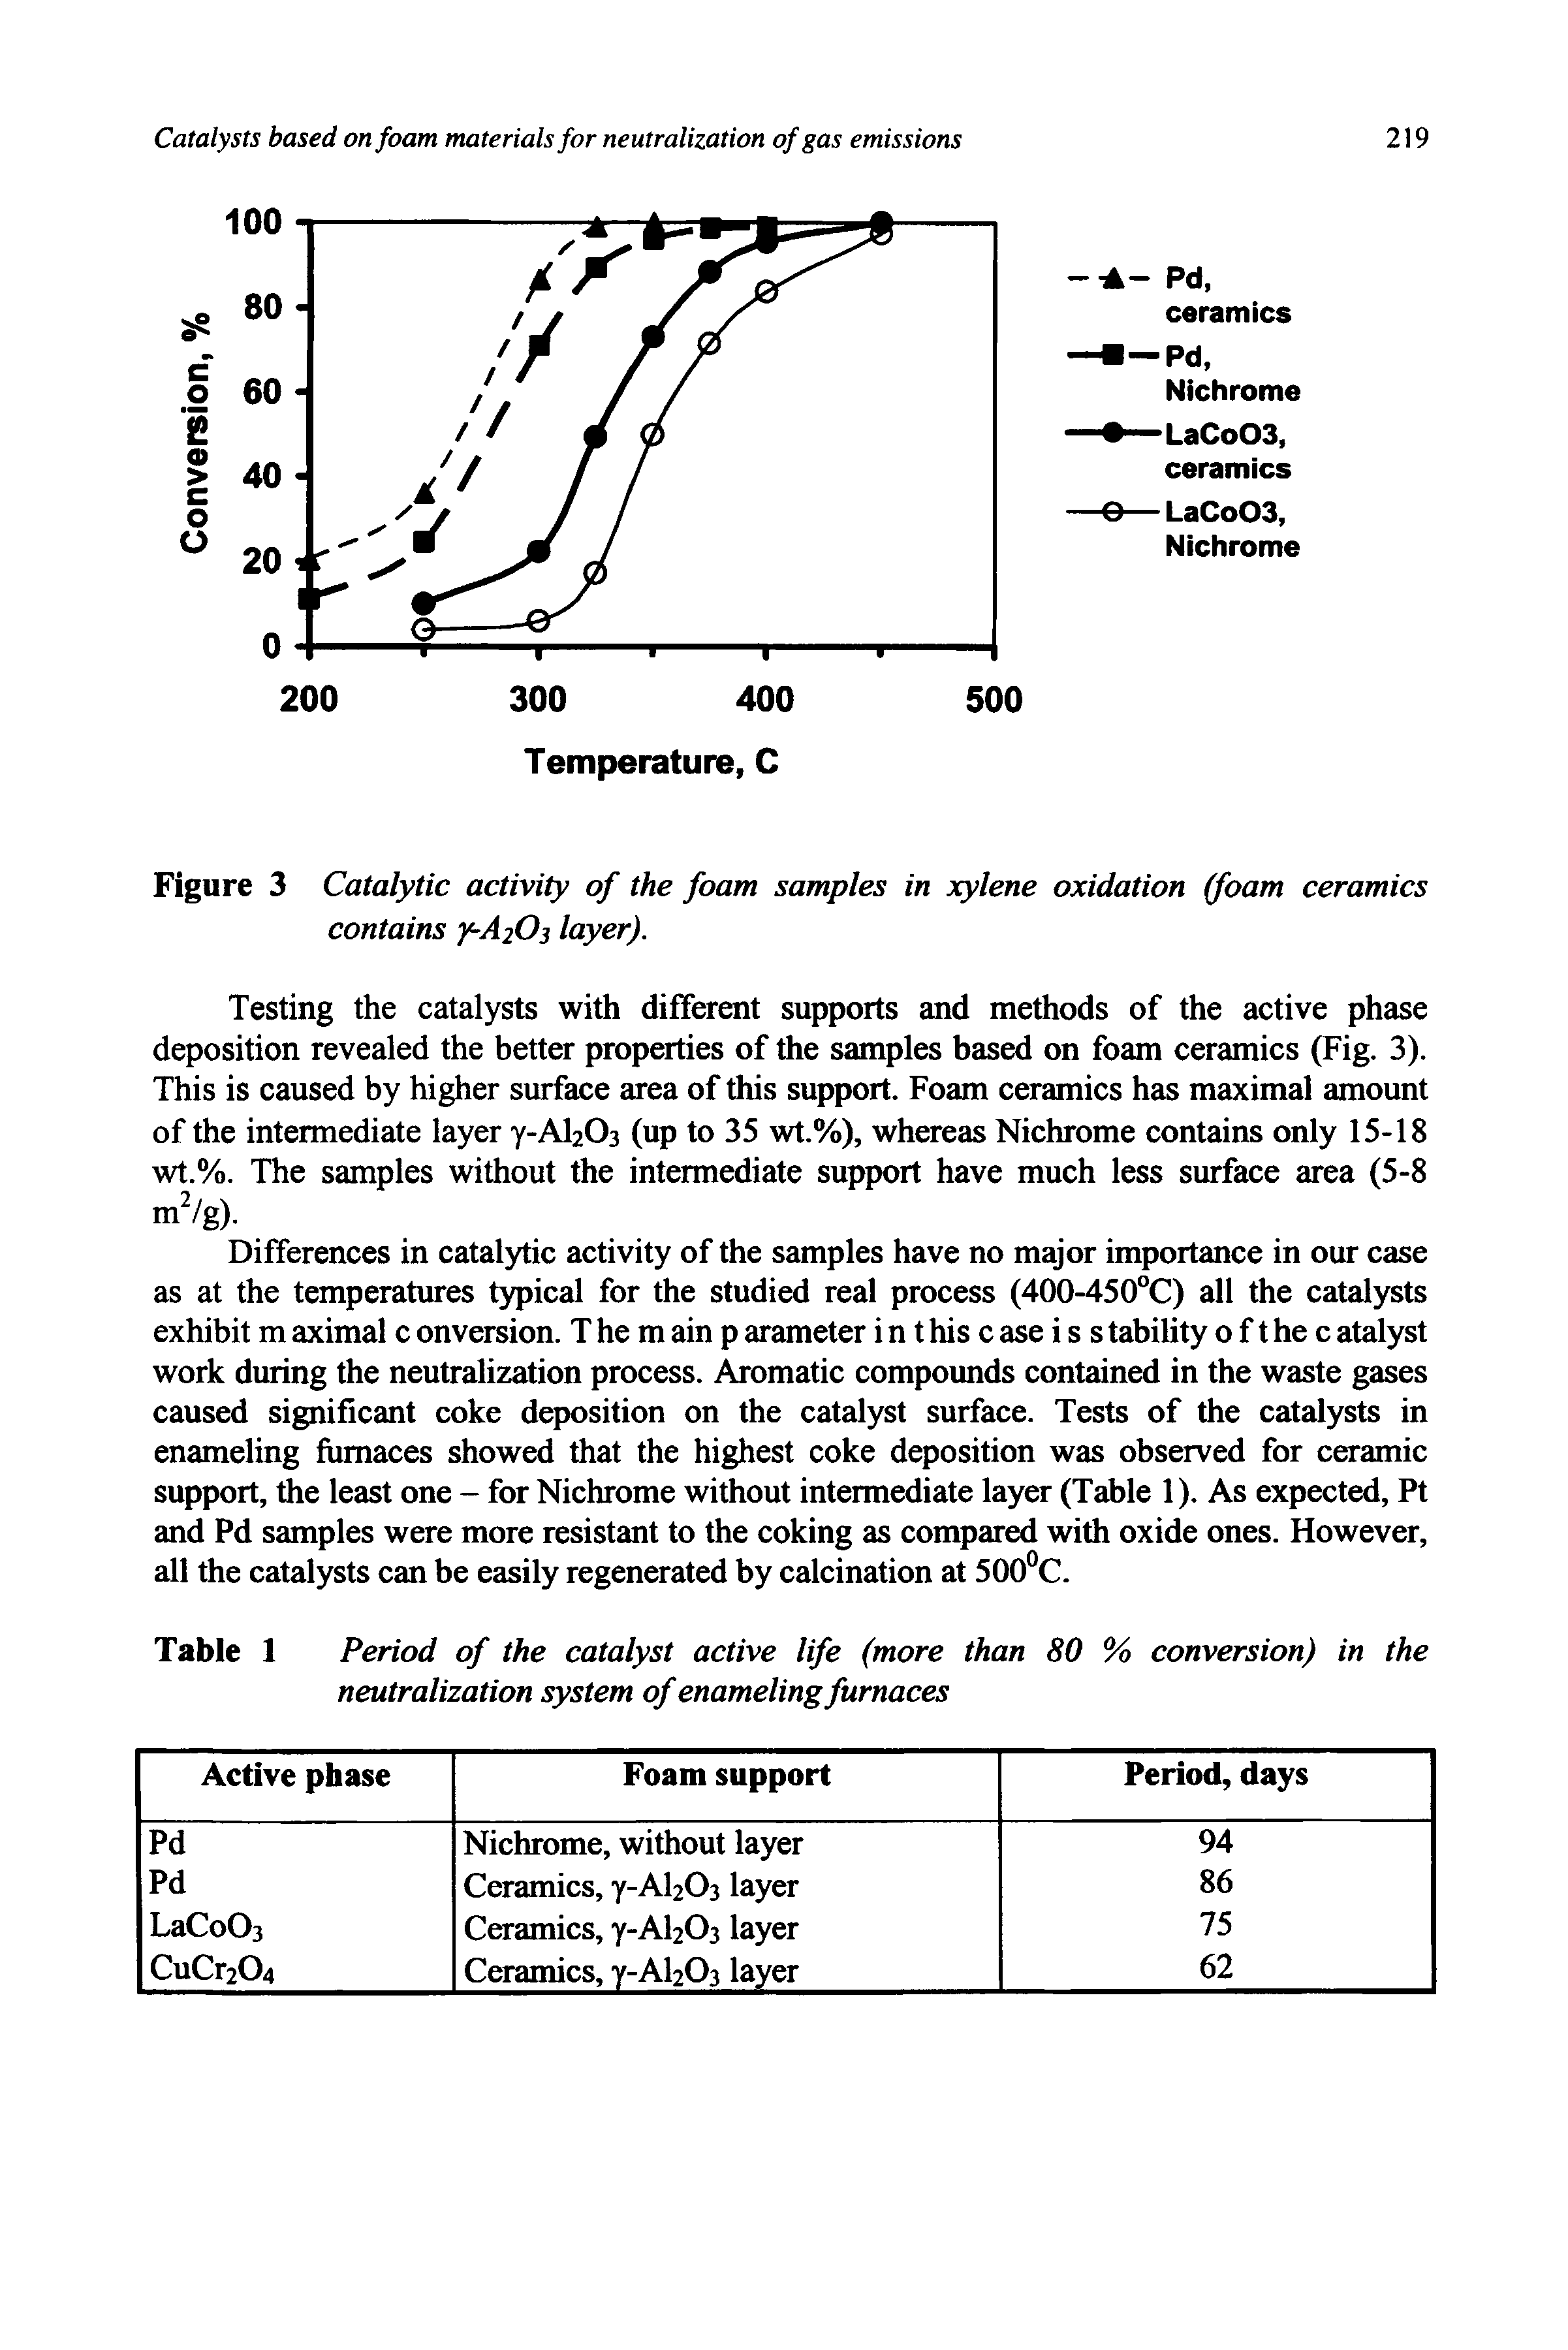 Figure 3 Catalytic activity of the foam samples in xylene oxidation (foam ceramics contains y-AjOs layer).